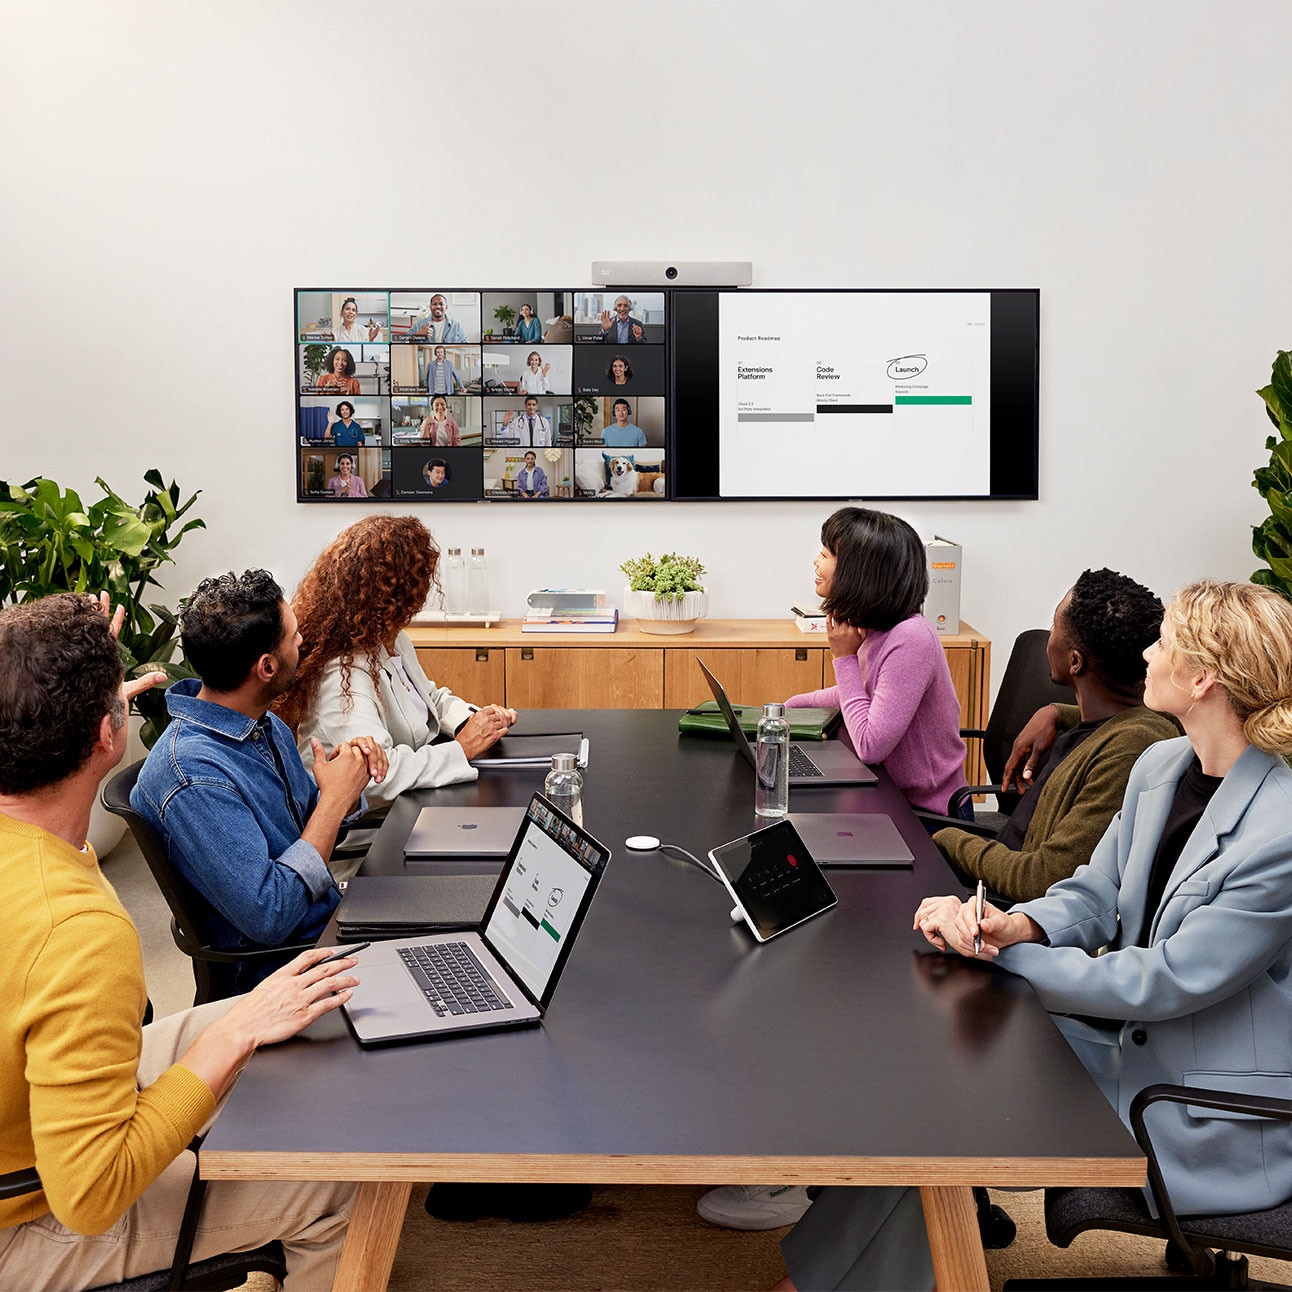 6 colleagues collaborate in a conference room, video conferencing and content sharing with several remote colleagues using the Webex Room Bar video bar.